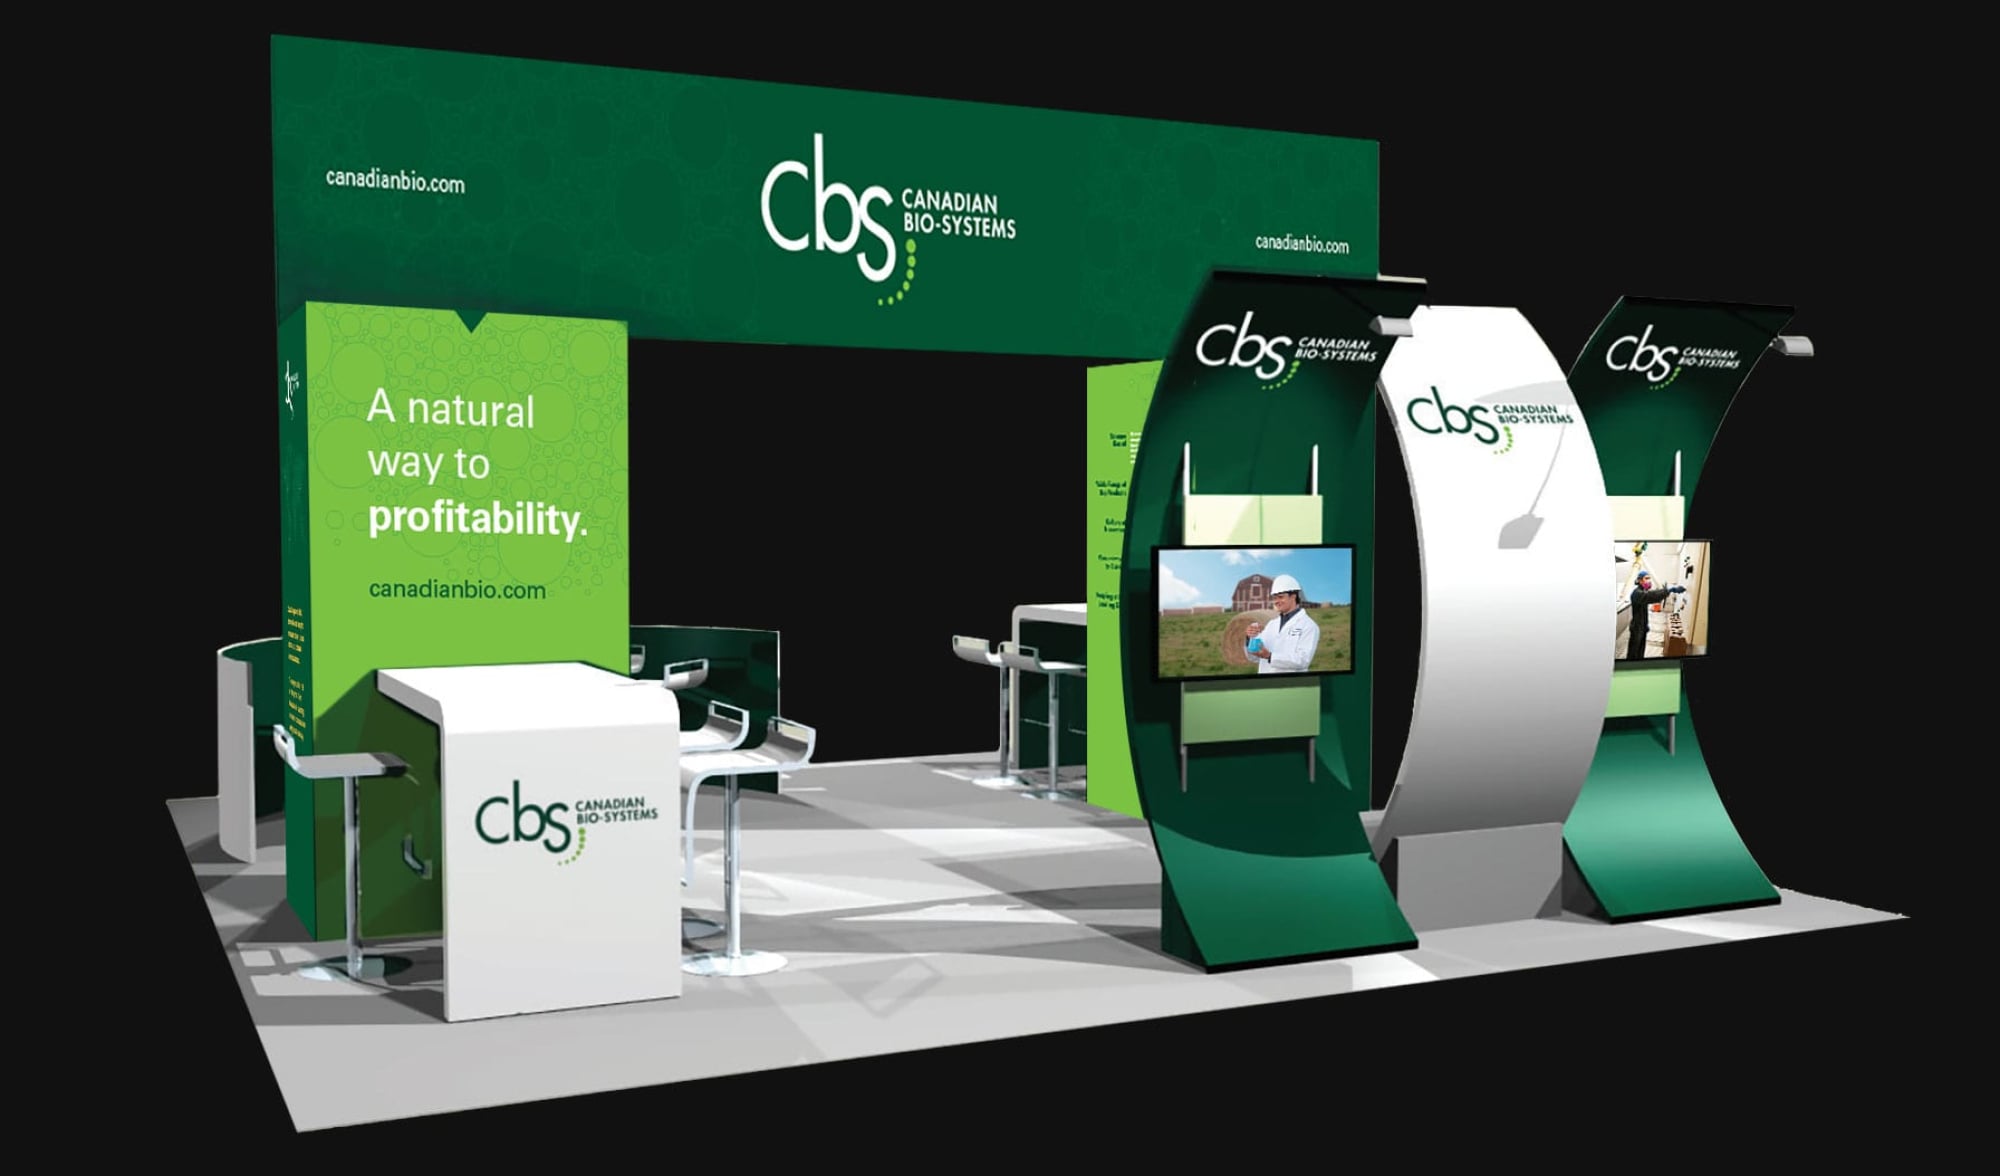 Canadian Bio-Systems tradeshow booth design